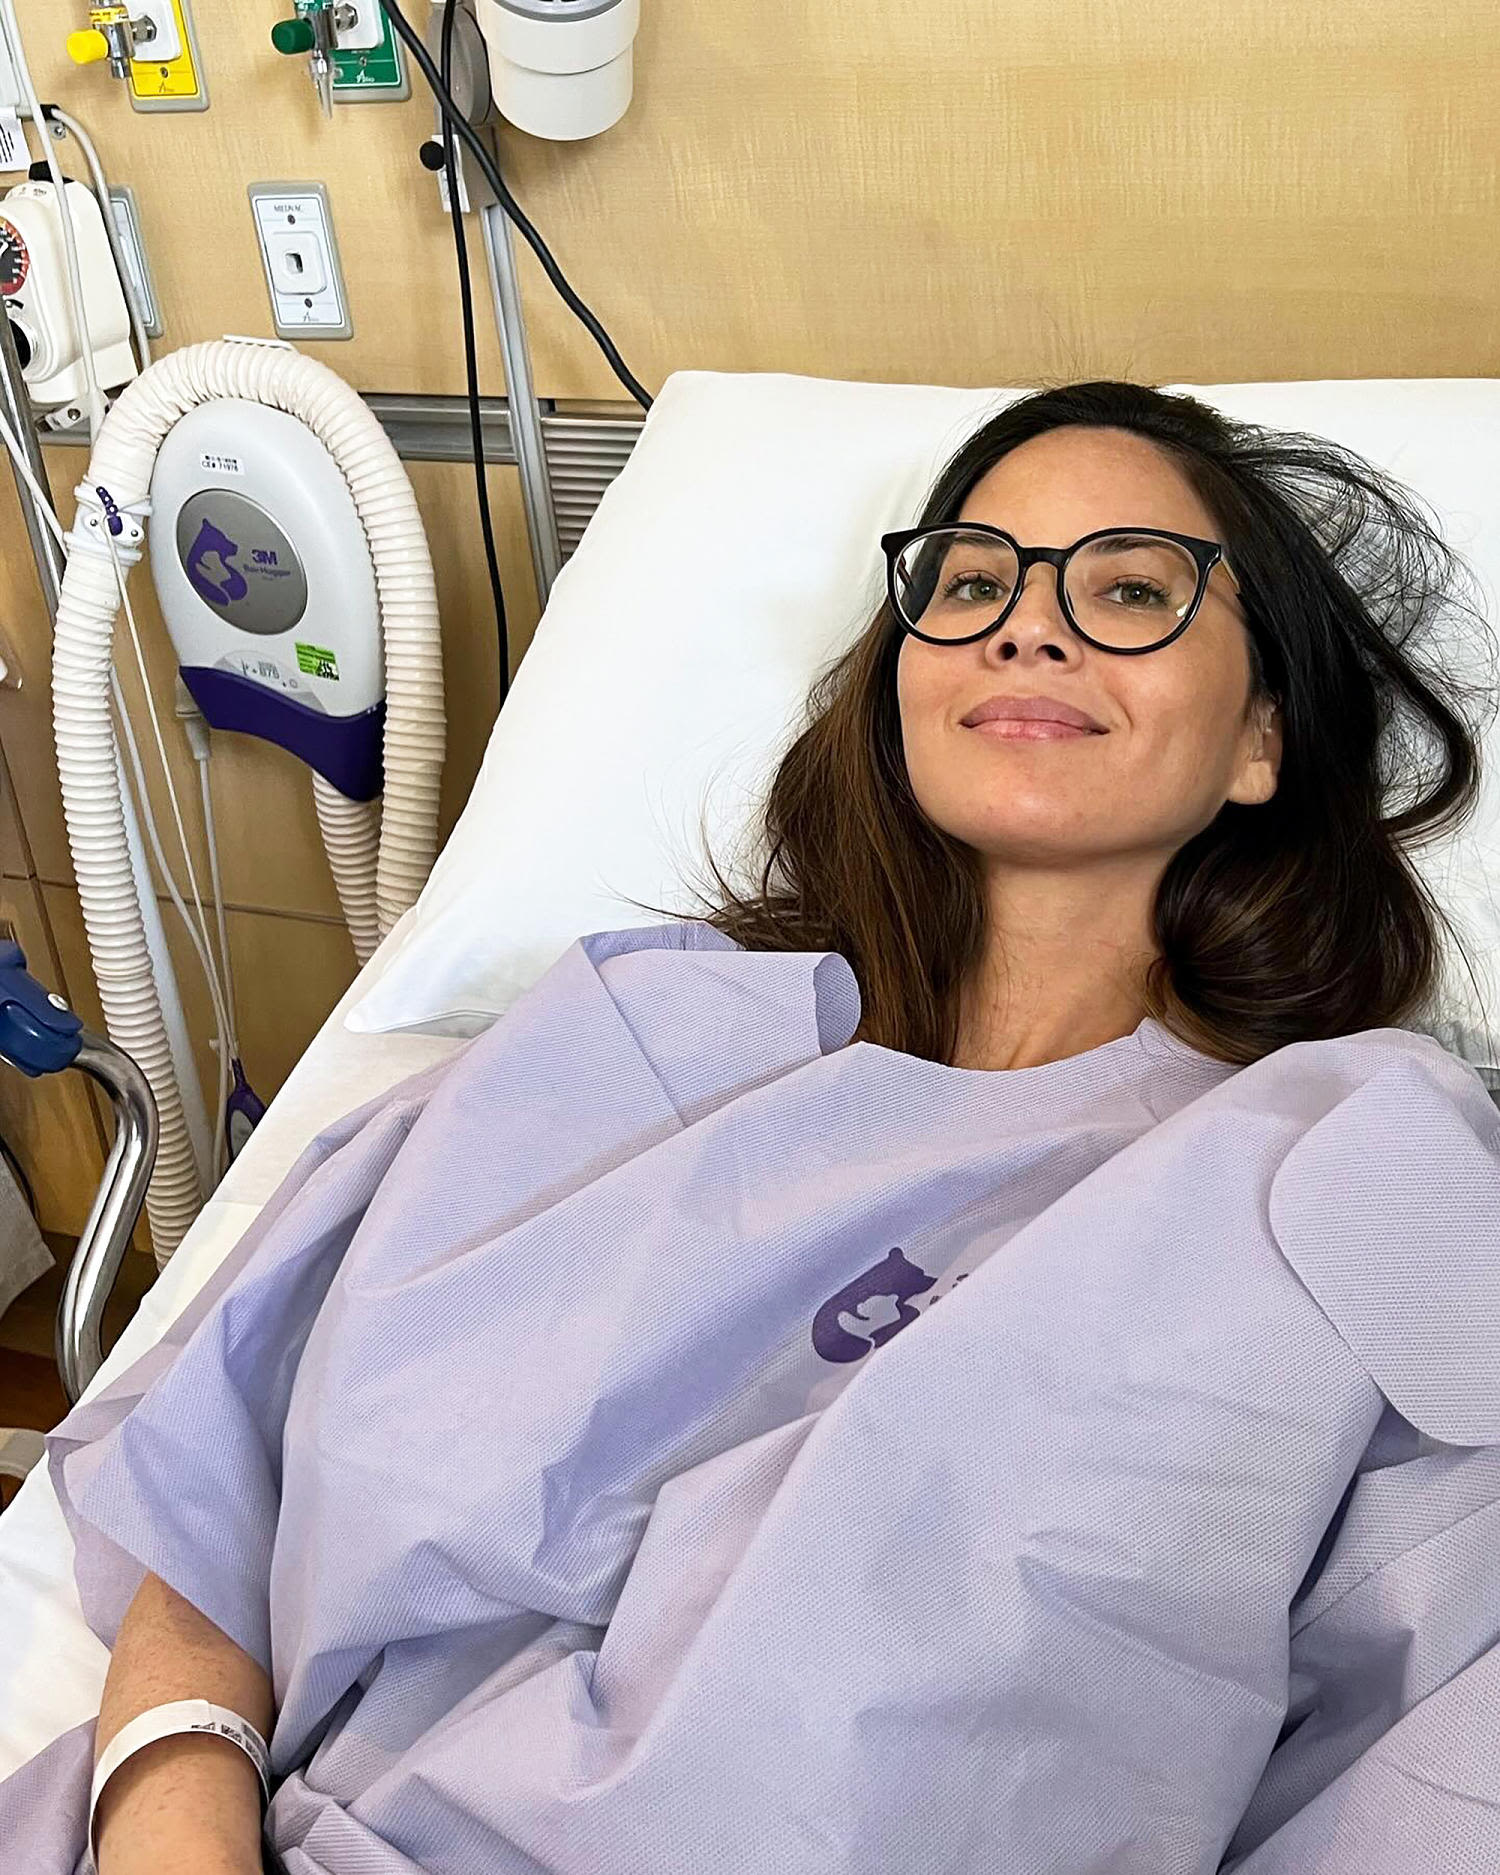 Olivia Munn reveals she had a hysterectomy last month as part of breast cancer treatment